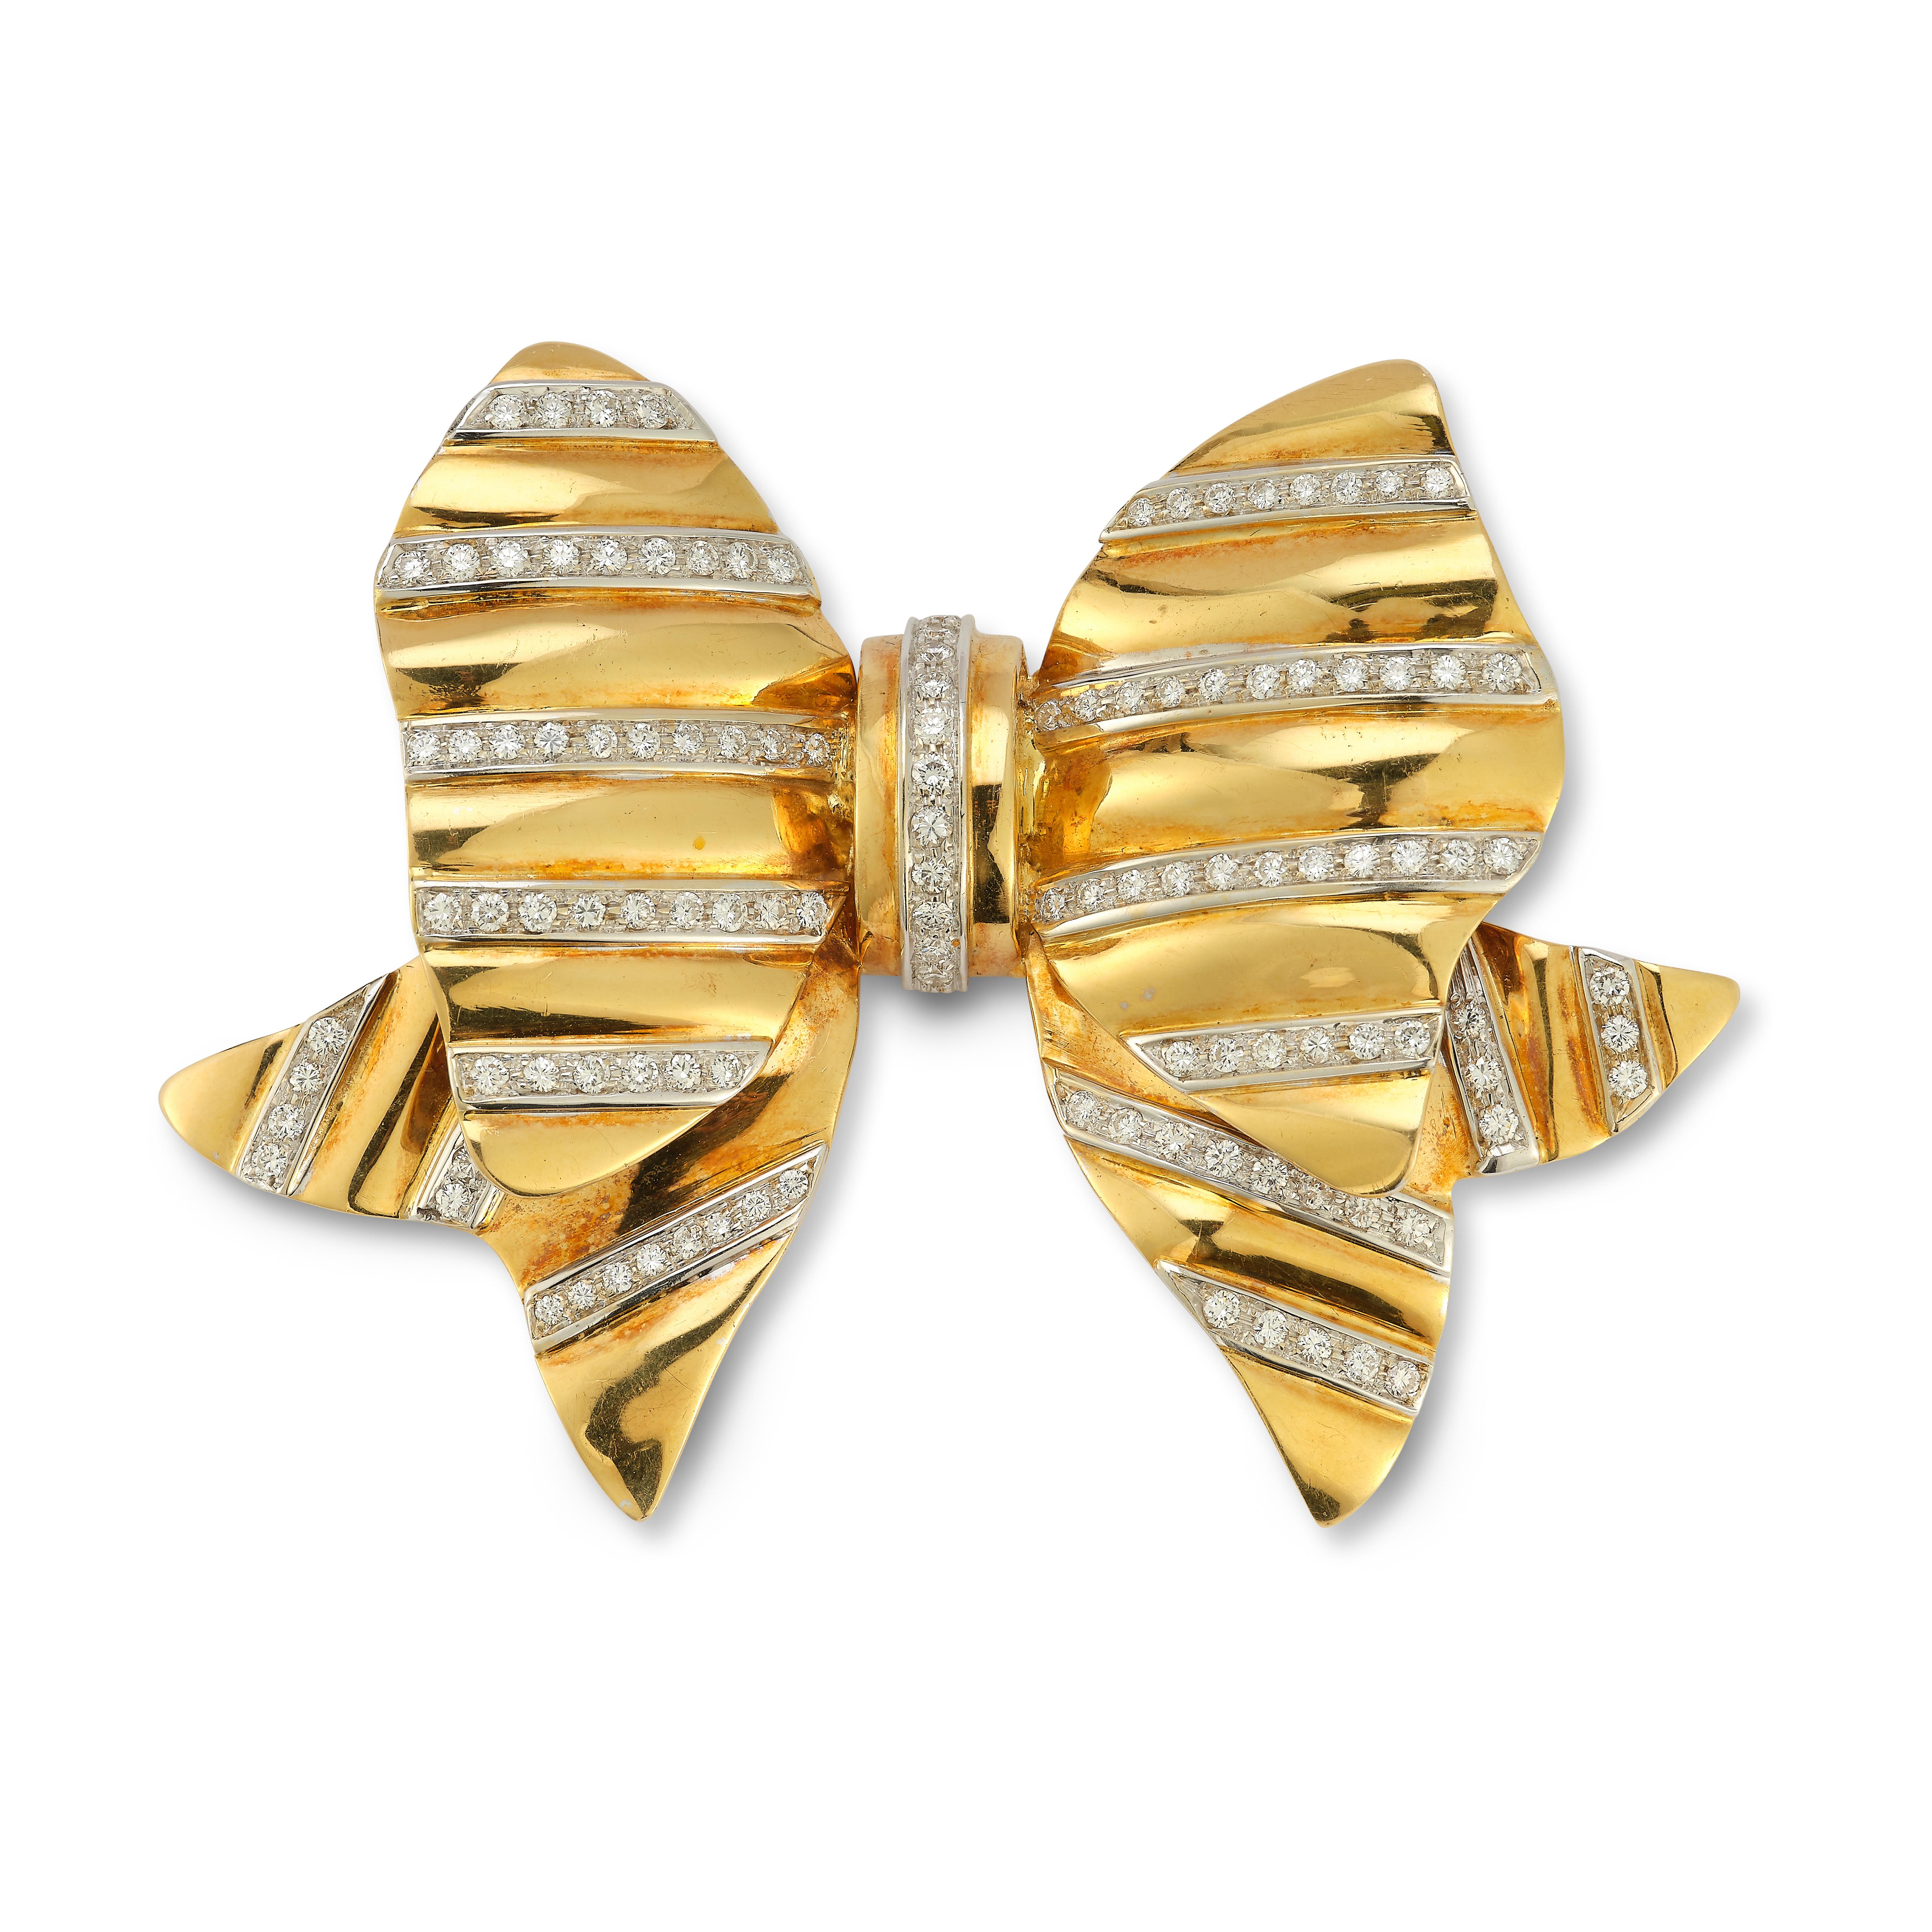 Large Diamond & Gold Bow Brooch,

Round cut diamonds set in 14k yellow gold 

Measurements: 3.5